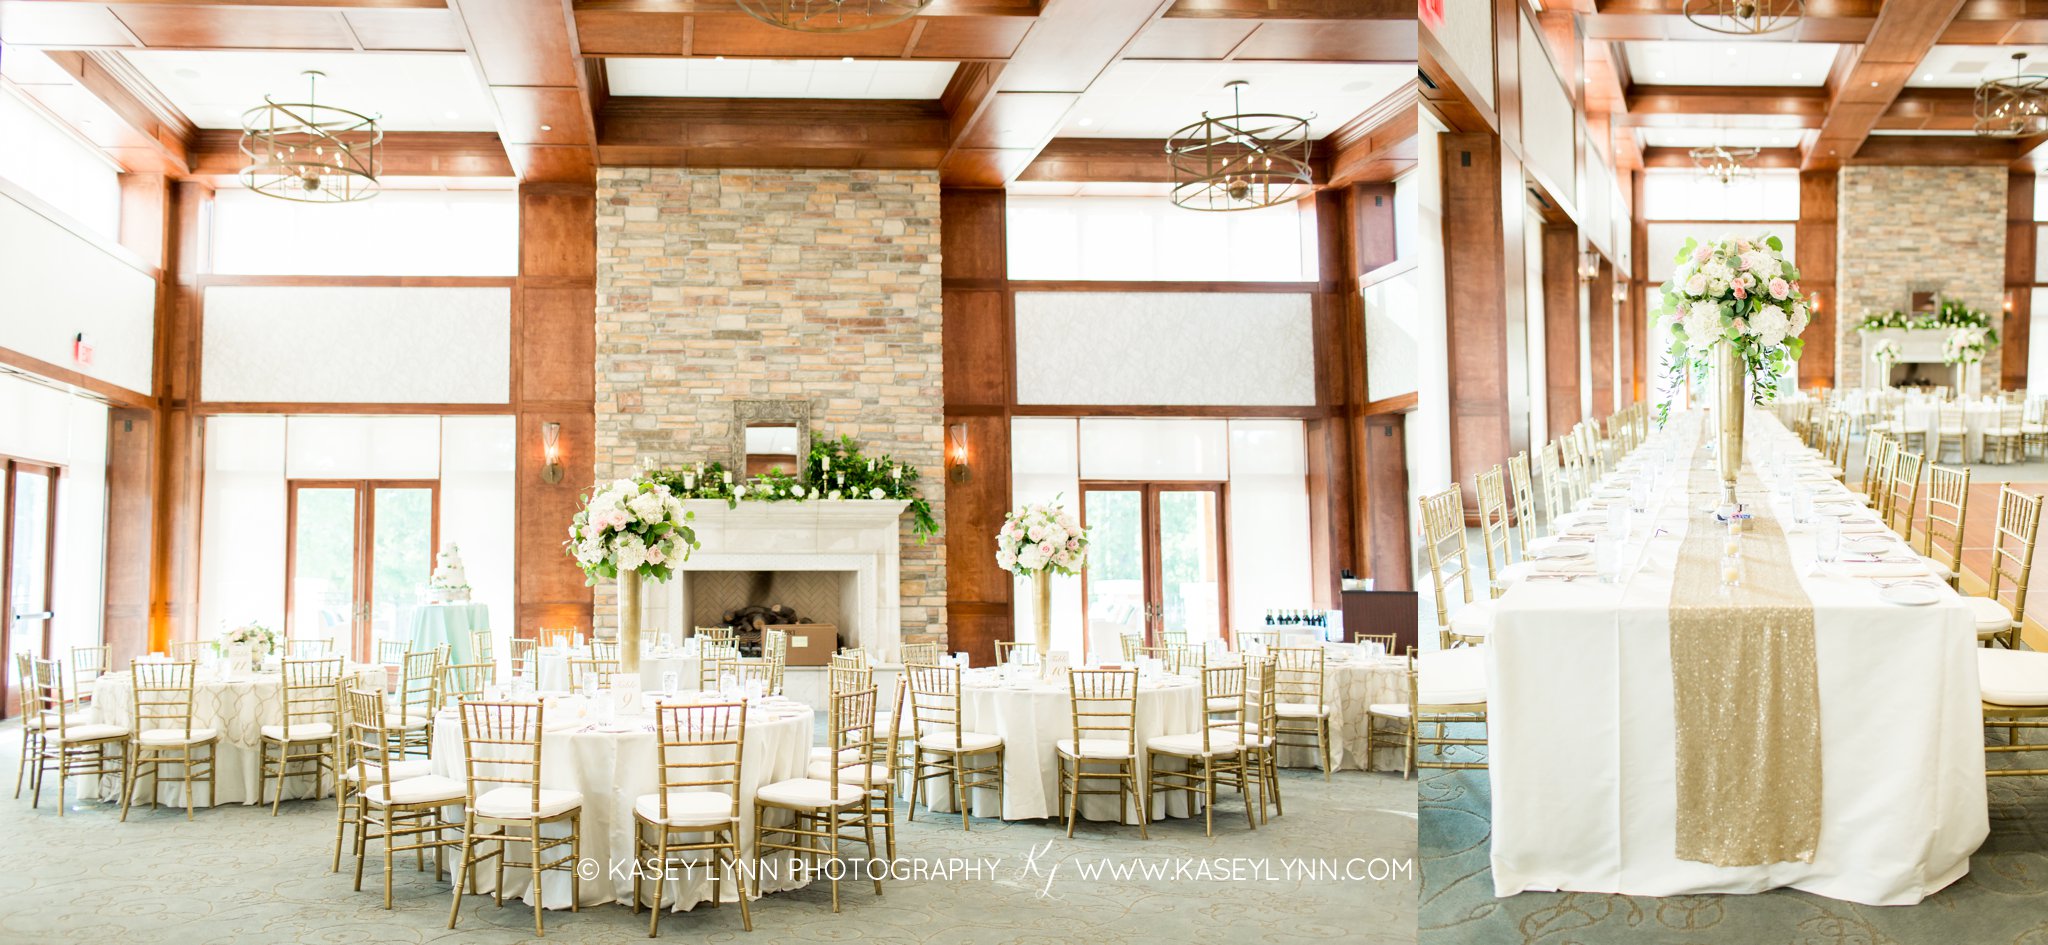 The Woodlands Country Club / Kasey Lynn Photography